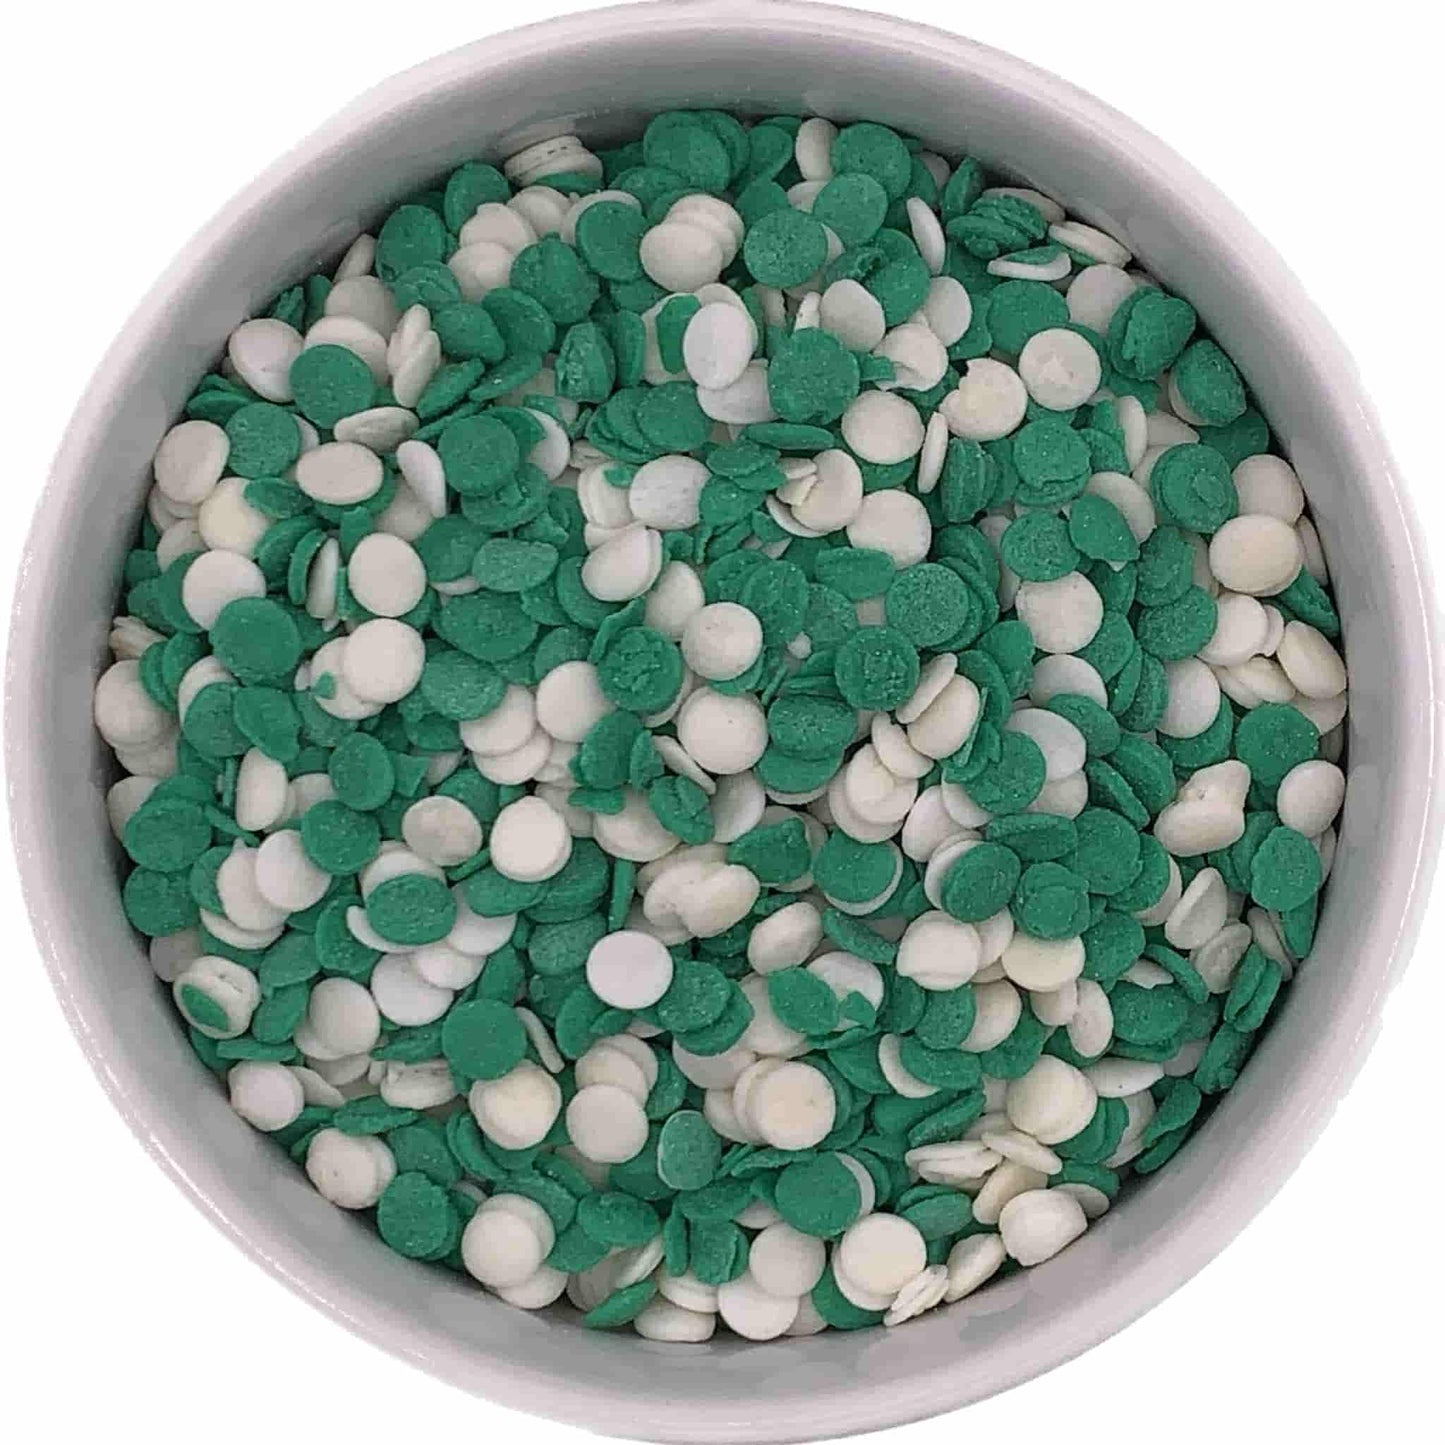 Festive St. Patrick's Day sequin sprinkle mix with green and white circular shapes for decorating holiday treats.